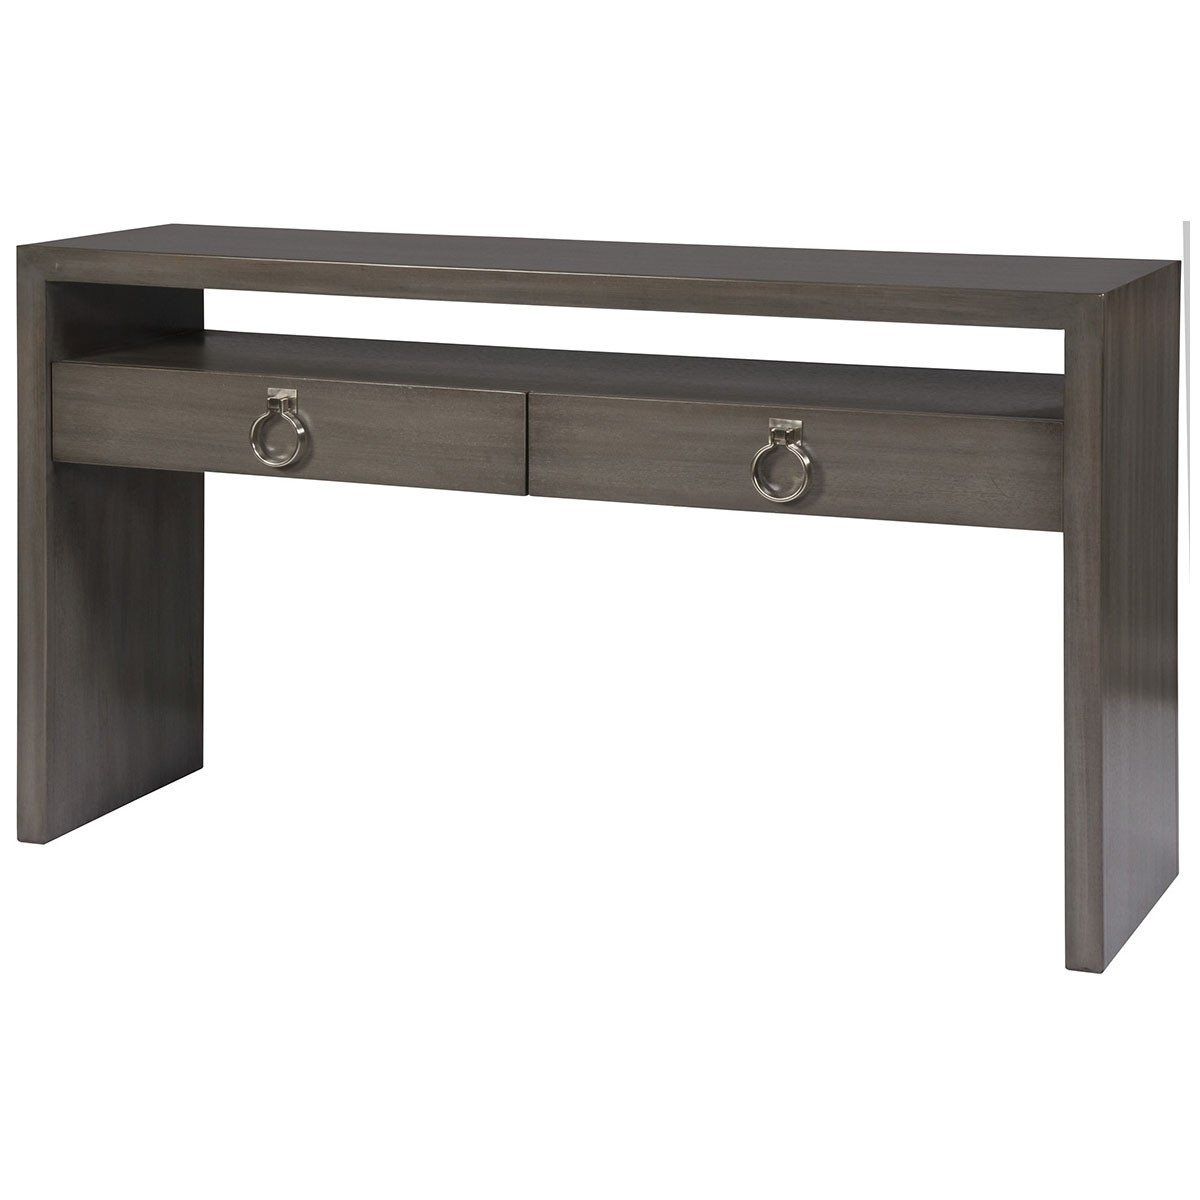 Vanguard Furniture Margo Console | Products | Furniture, Console Pertaining To Parsons Concrete Top & Brass Base 48x16 Console Tables (Gallery 8 of 20)